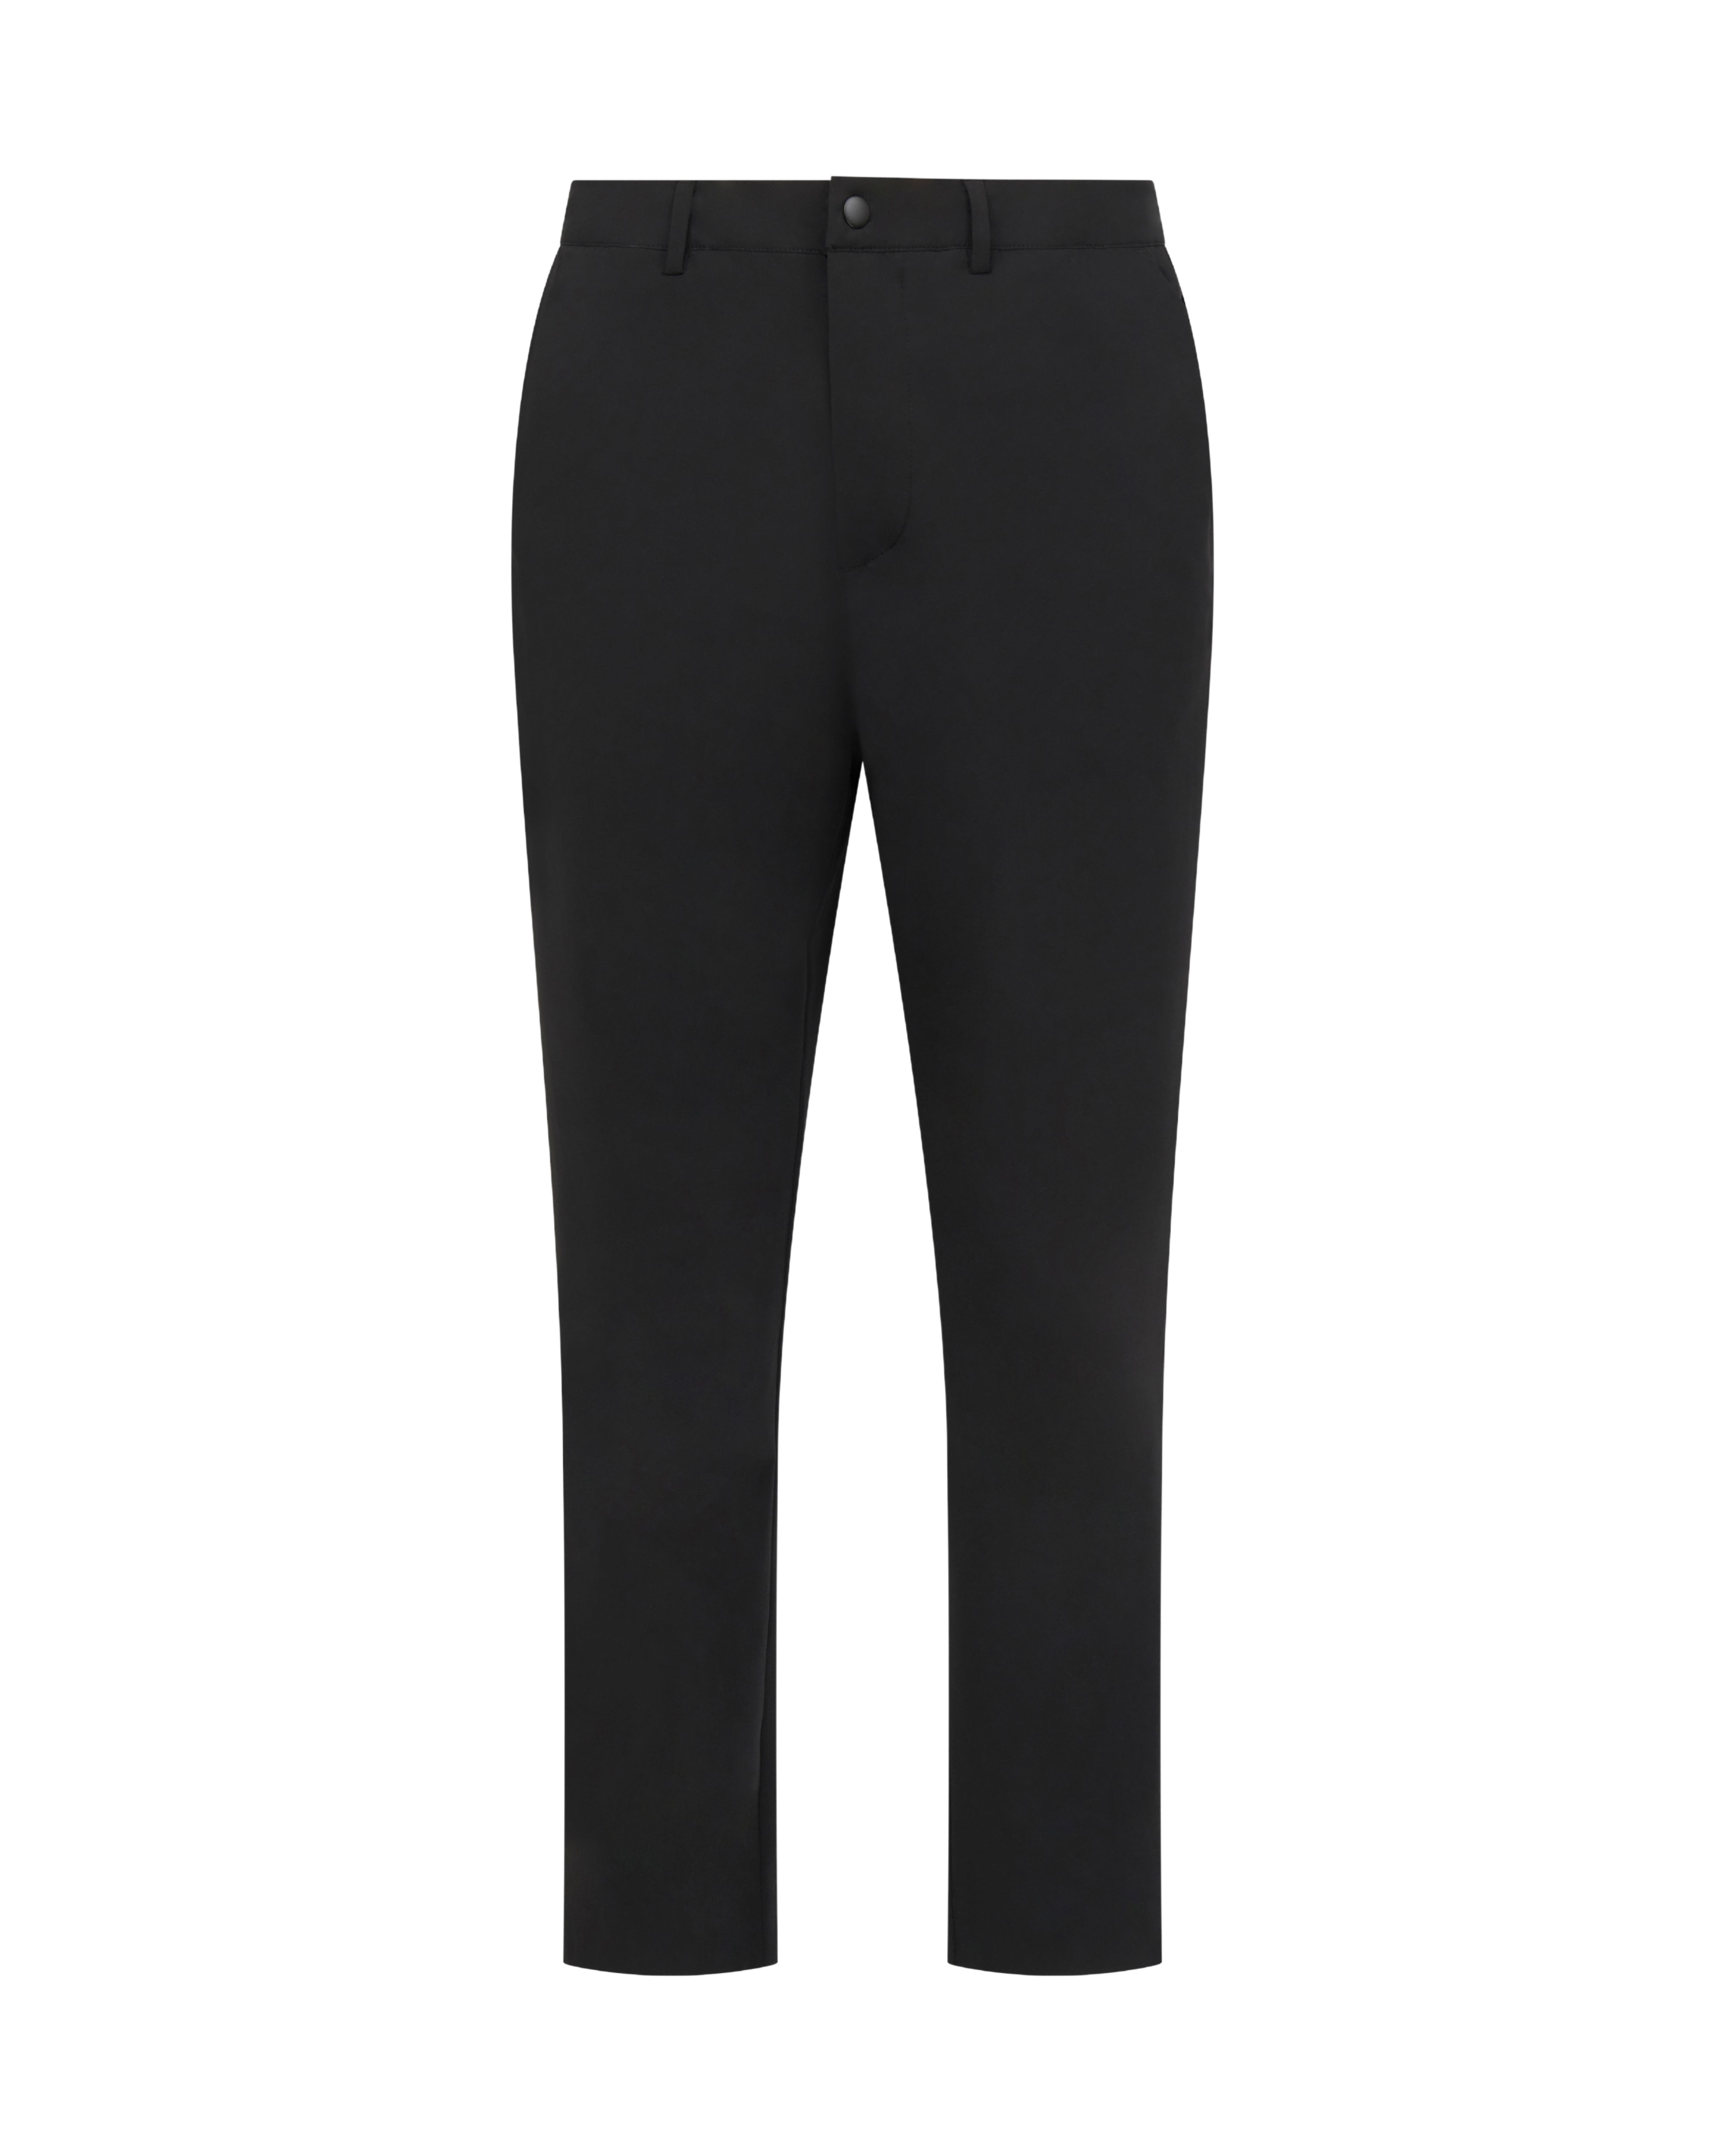 MANORS Men's The Lightweight Course Trouser